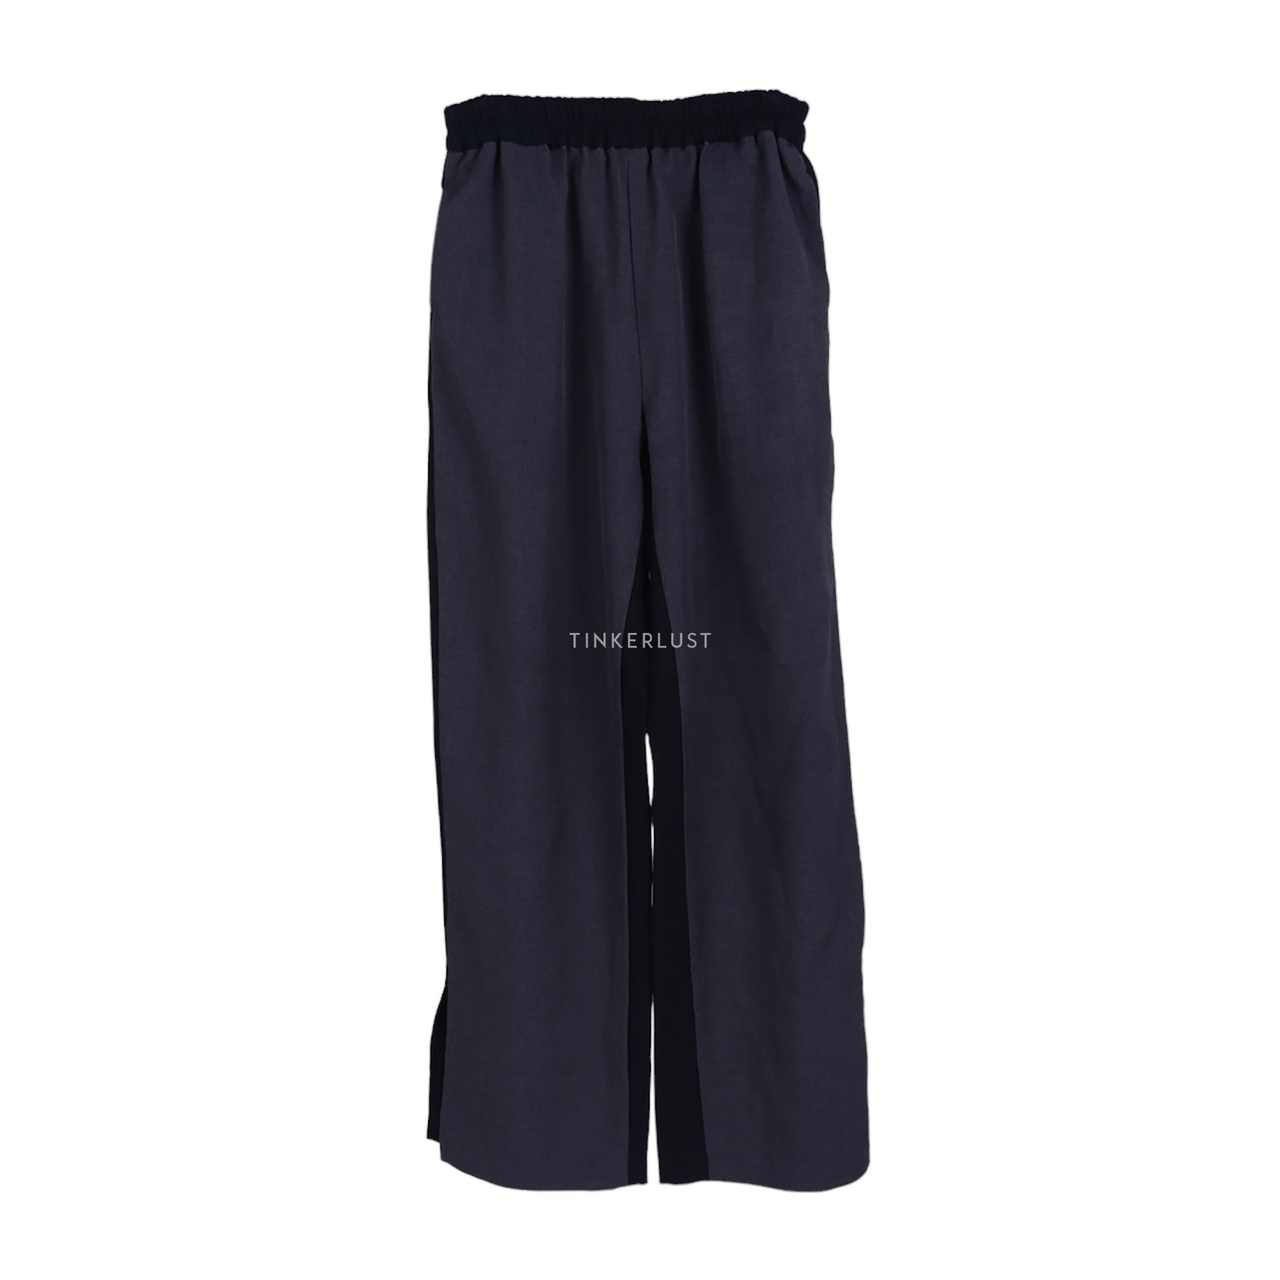 Private Collection Black & Grey Long Pants